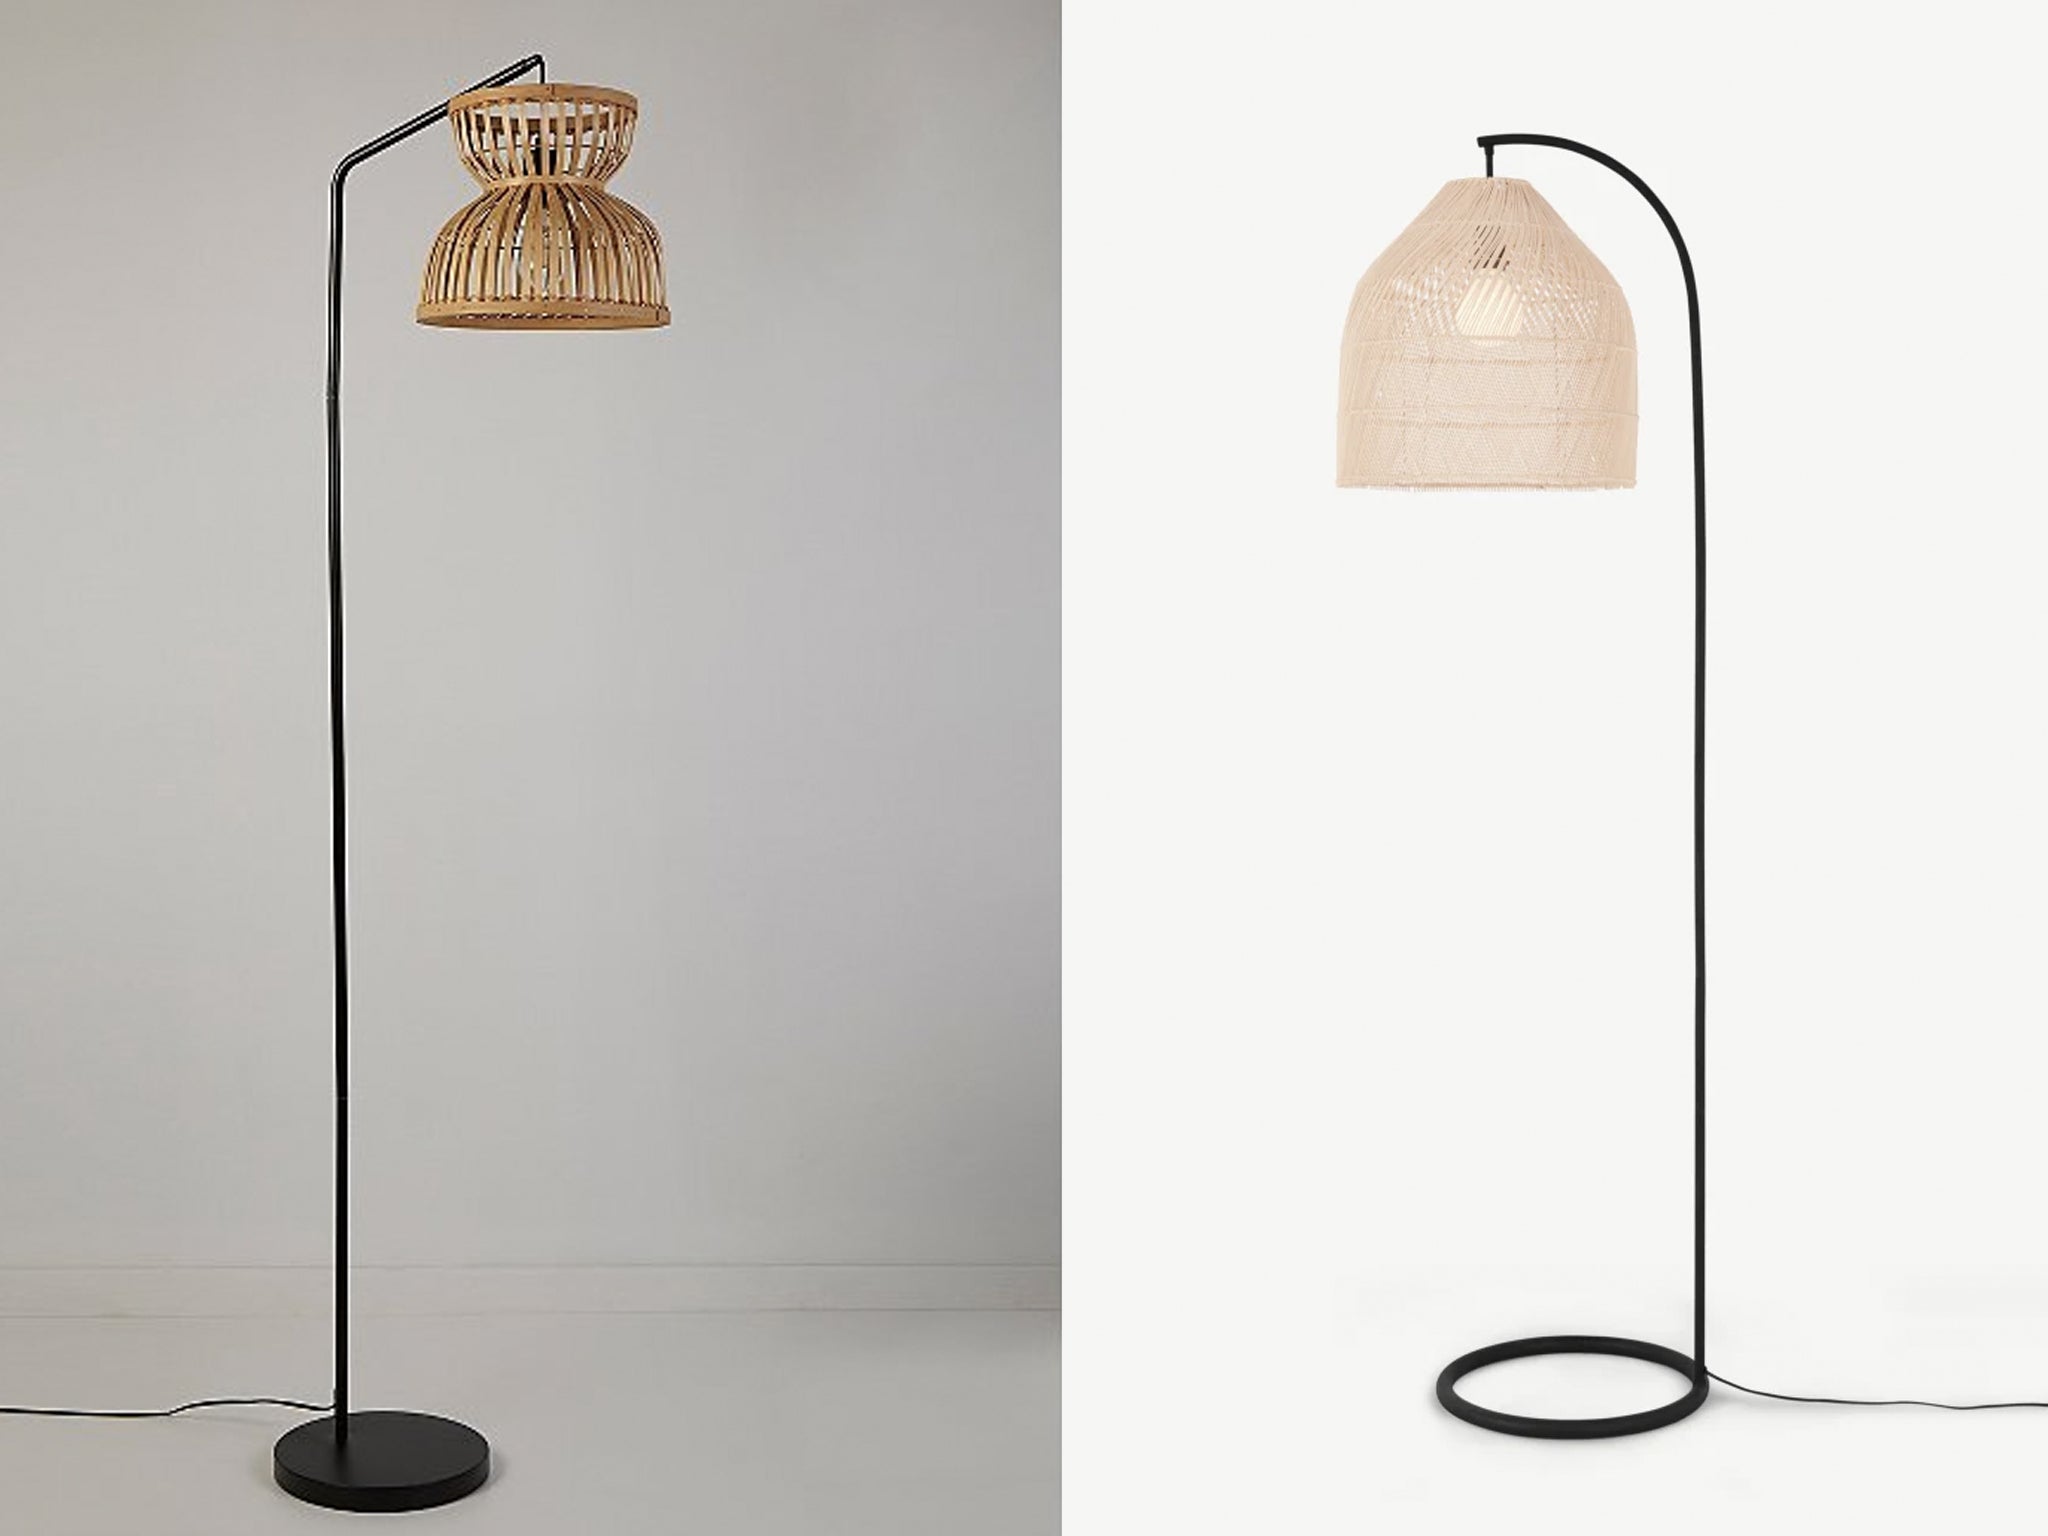 Asda’s lamp on the left, and Made’s version on the right